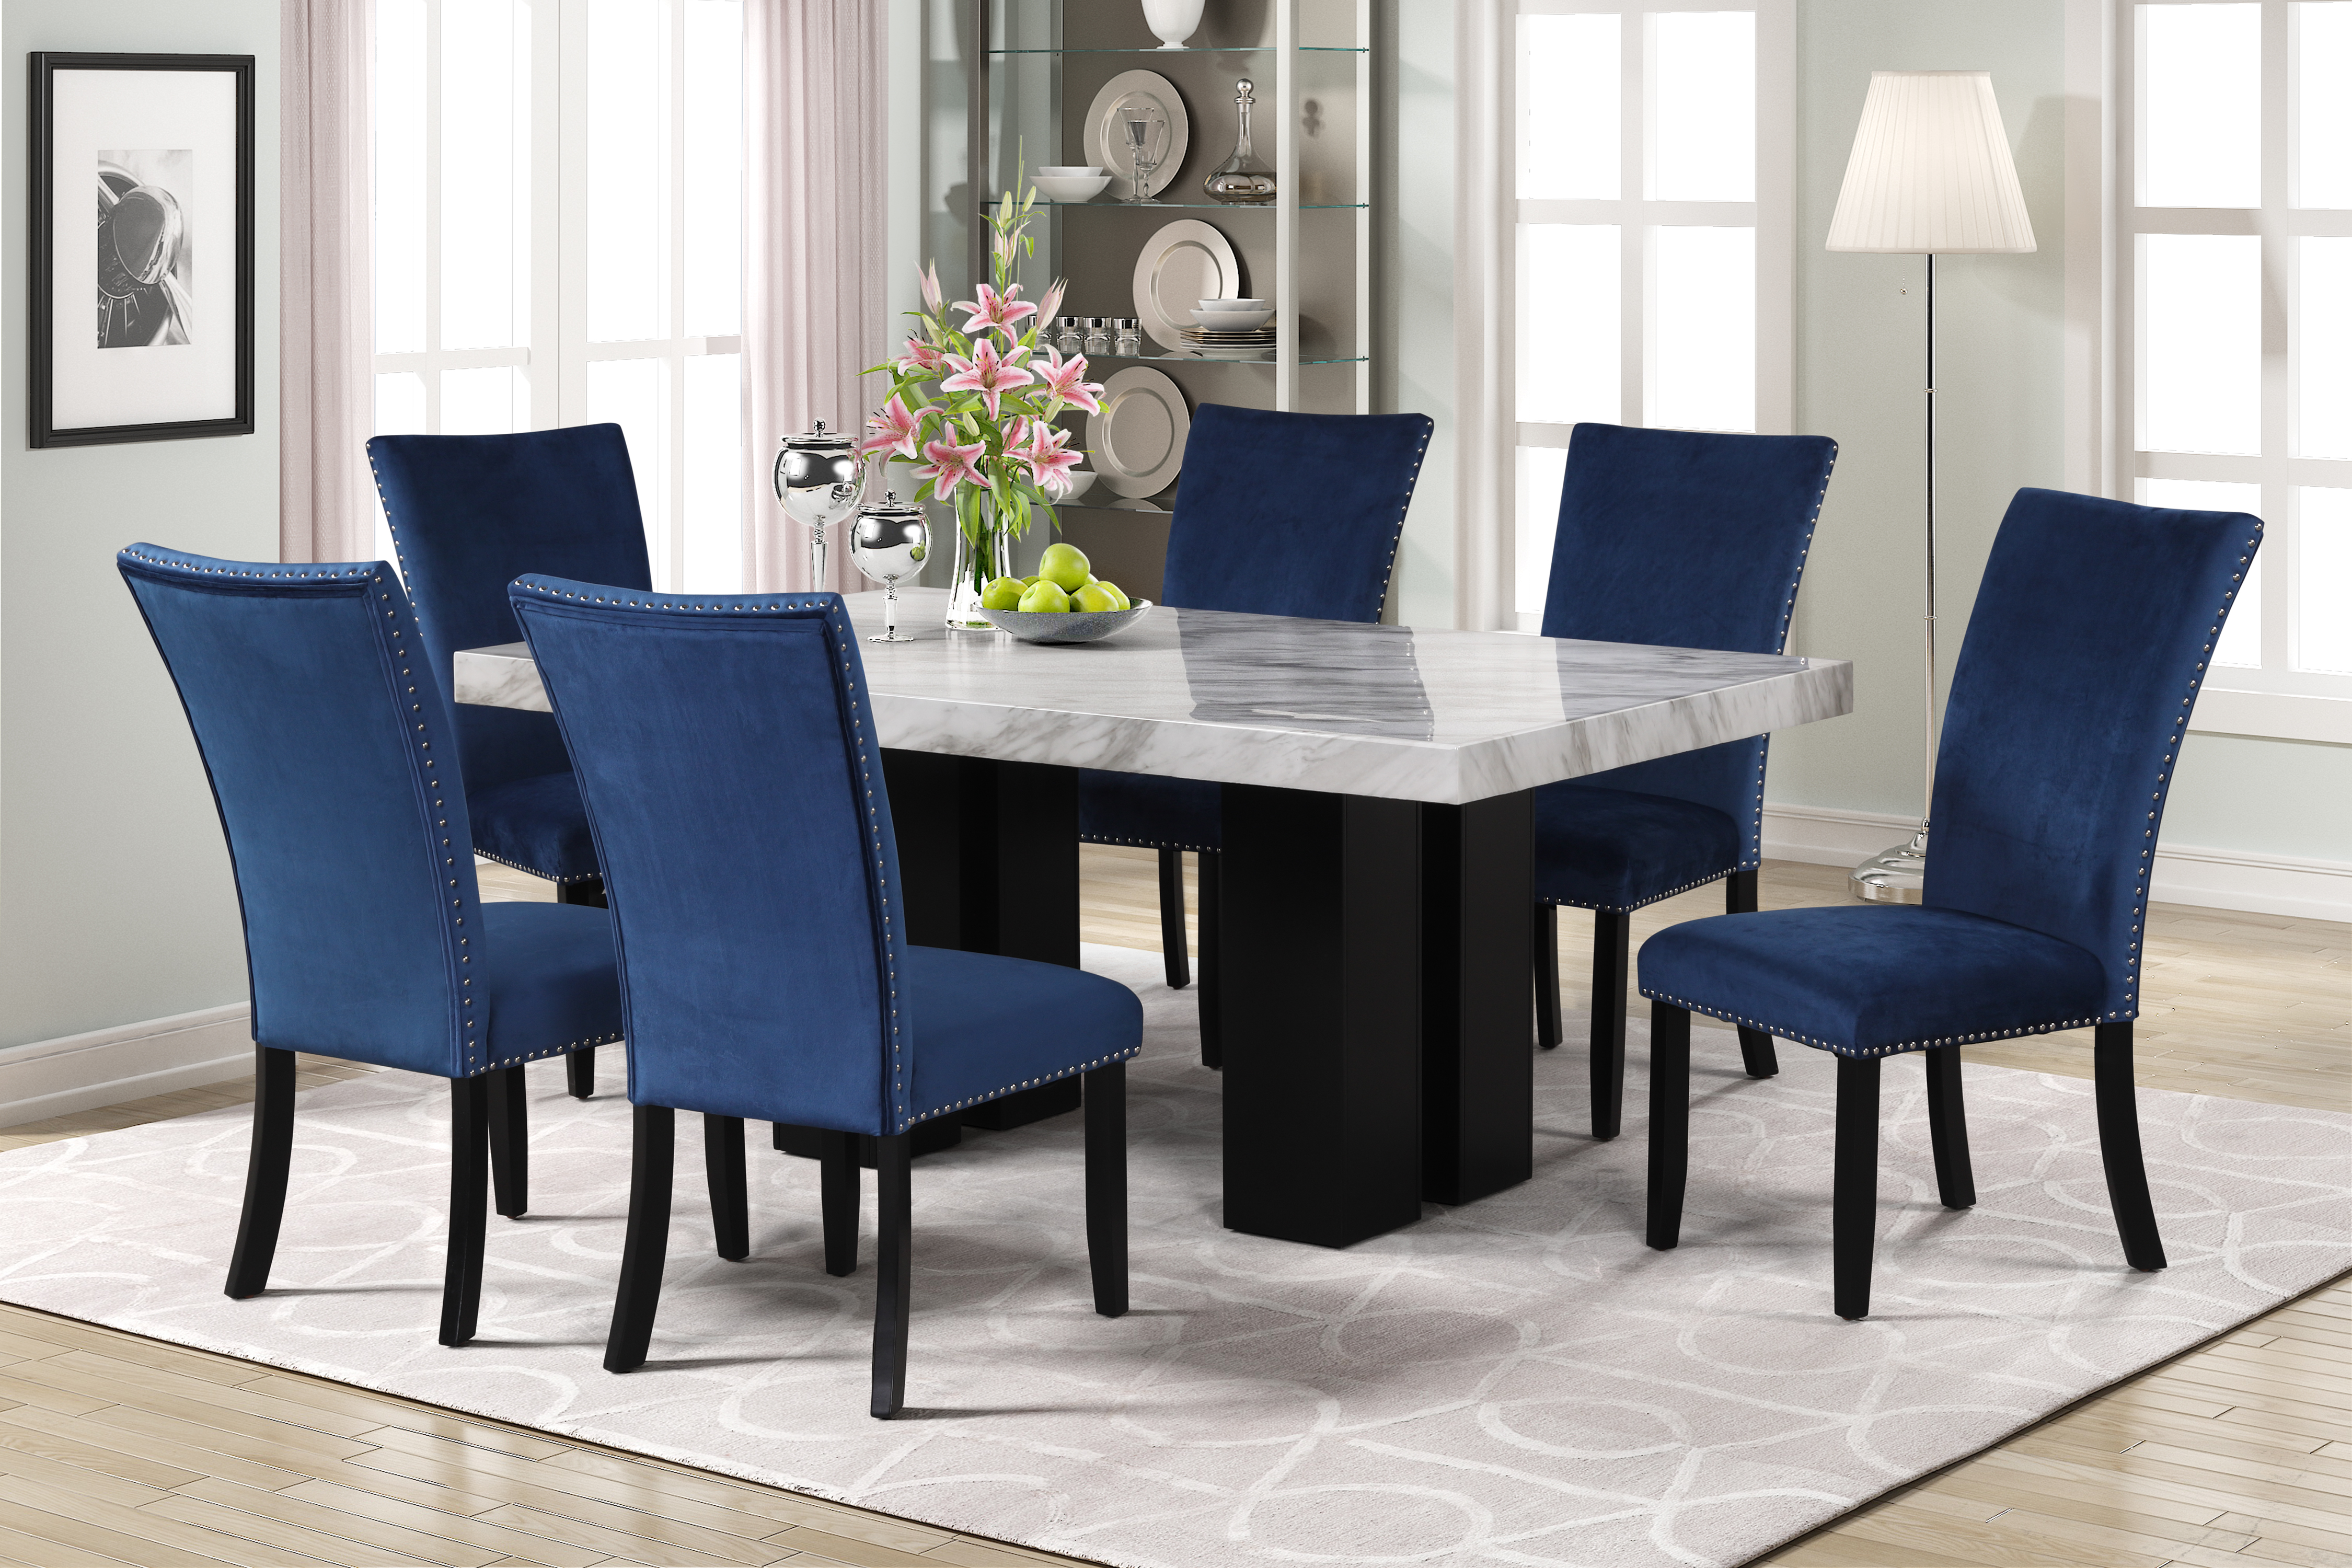 7-piece Dining Table Set with 1 Faux Marble Dining Rectangular Table and 6 Upholstered-Seat Chairs ,for Dining room and Living Room Furniture, Table Top:70in.Lx42in.Wx3in.H, Blue-Boyel Living